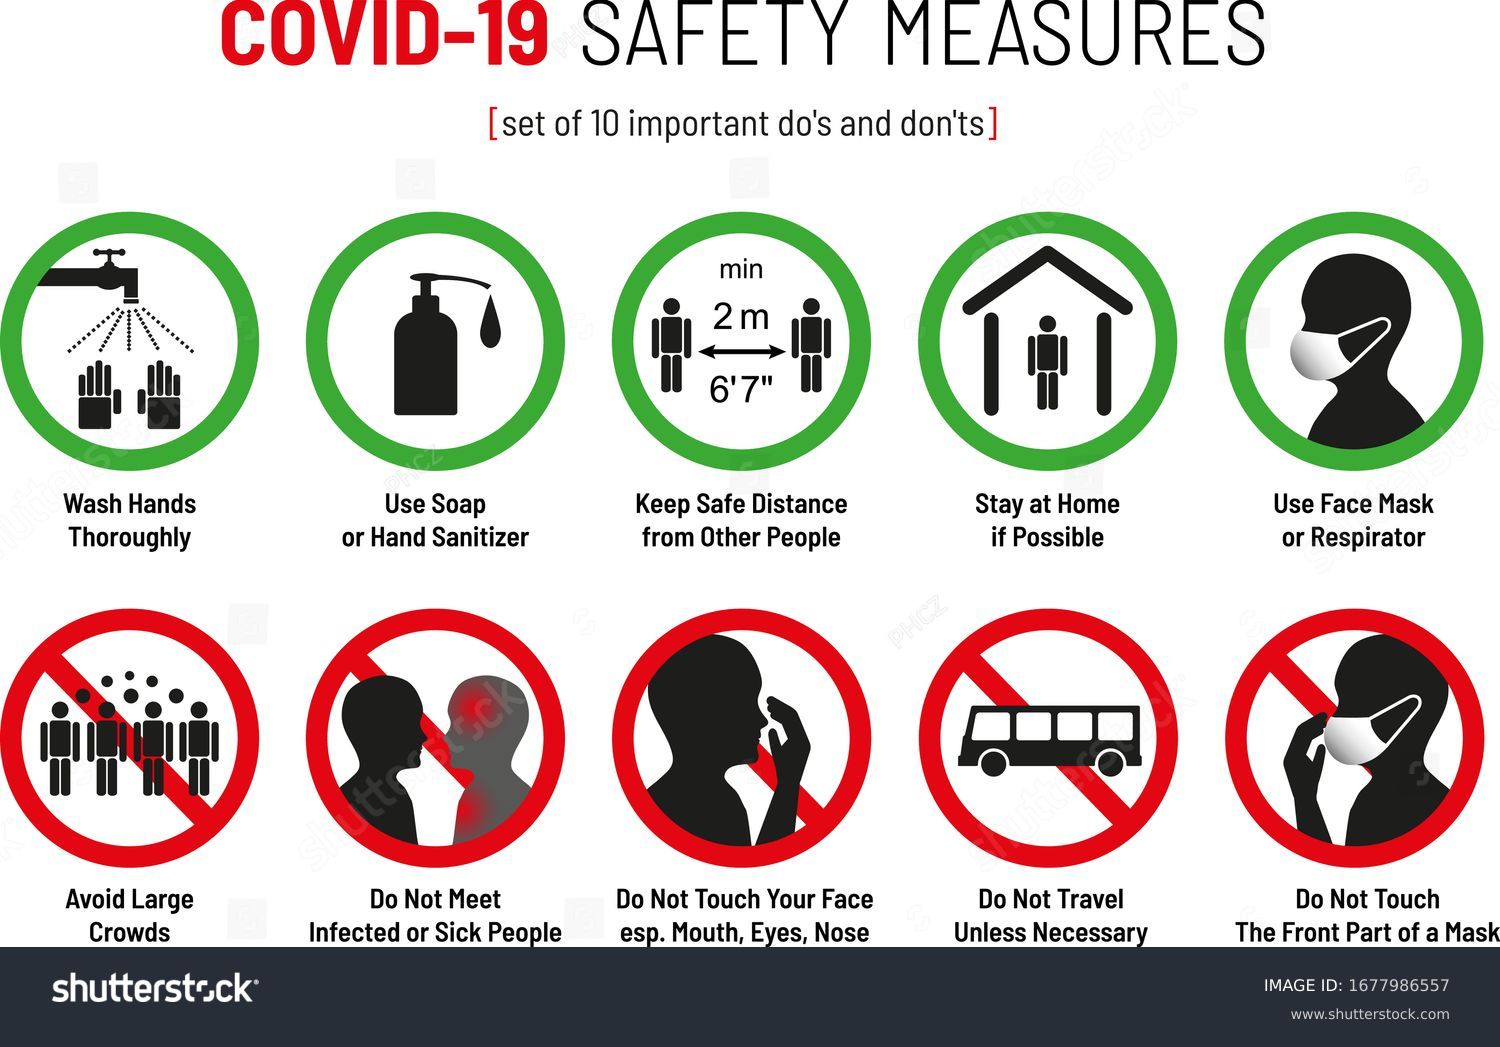  covid-19 cases zealand Now